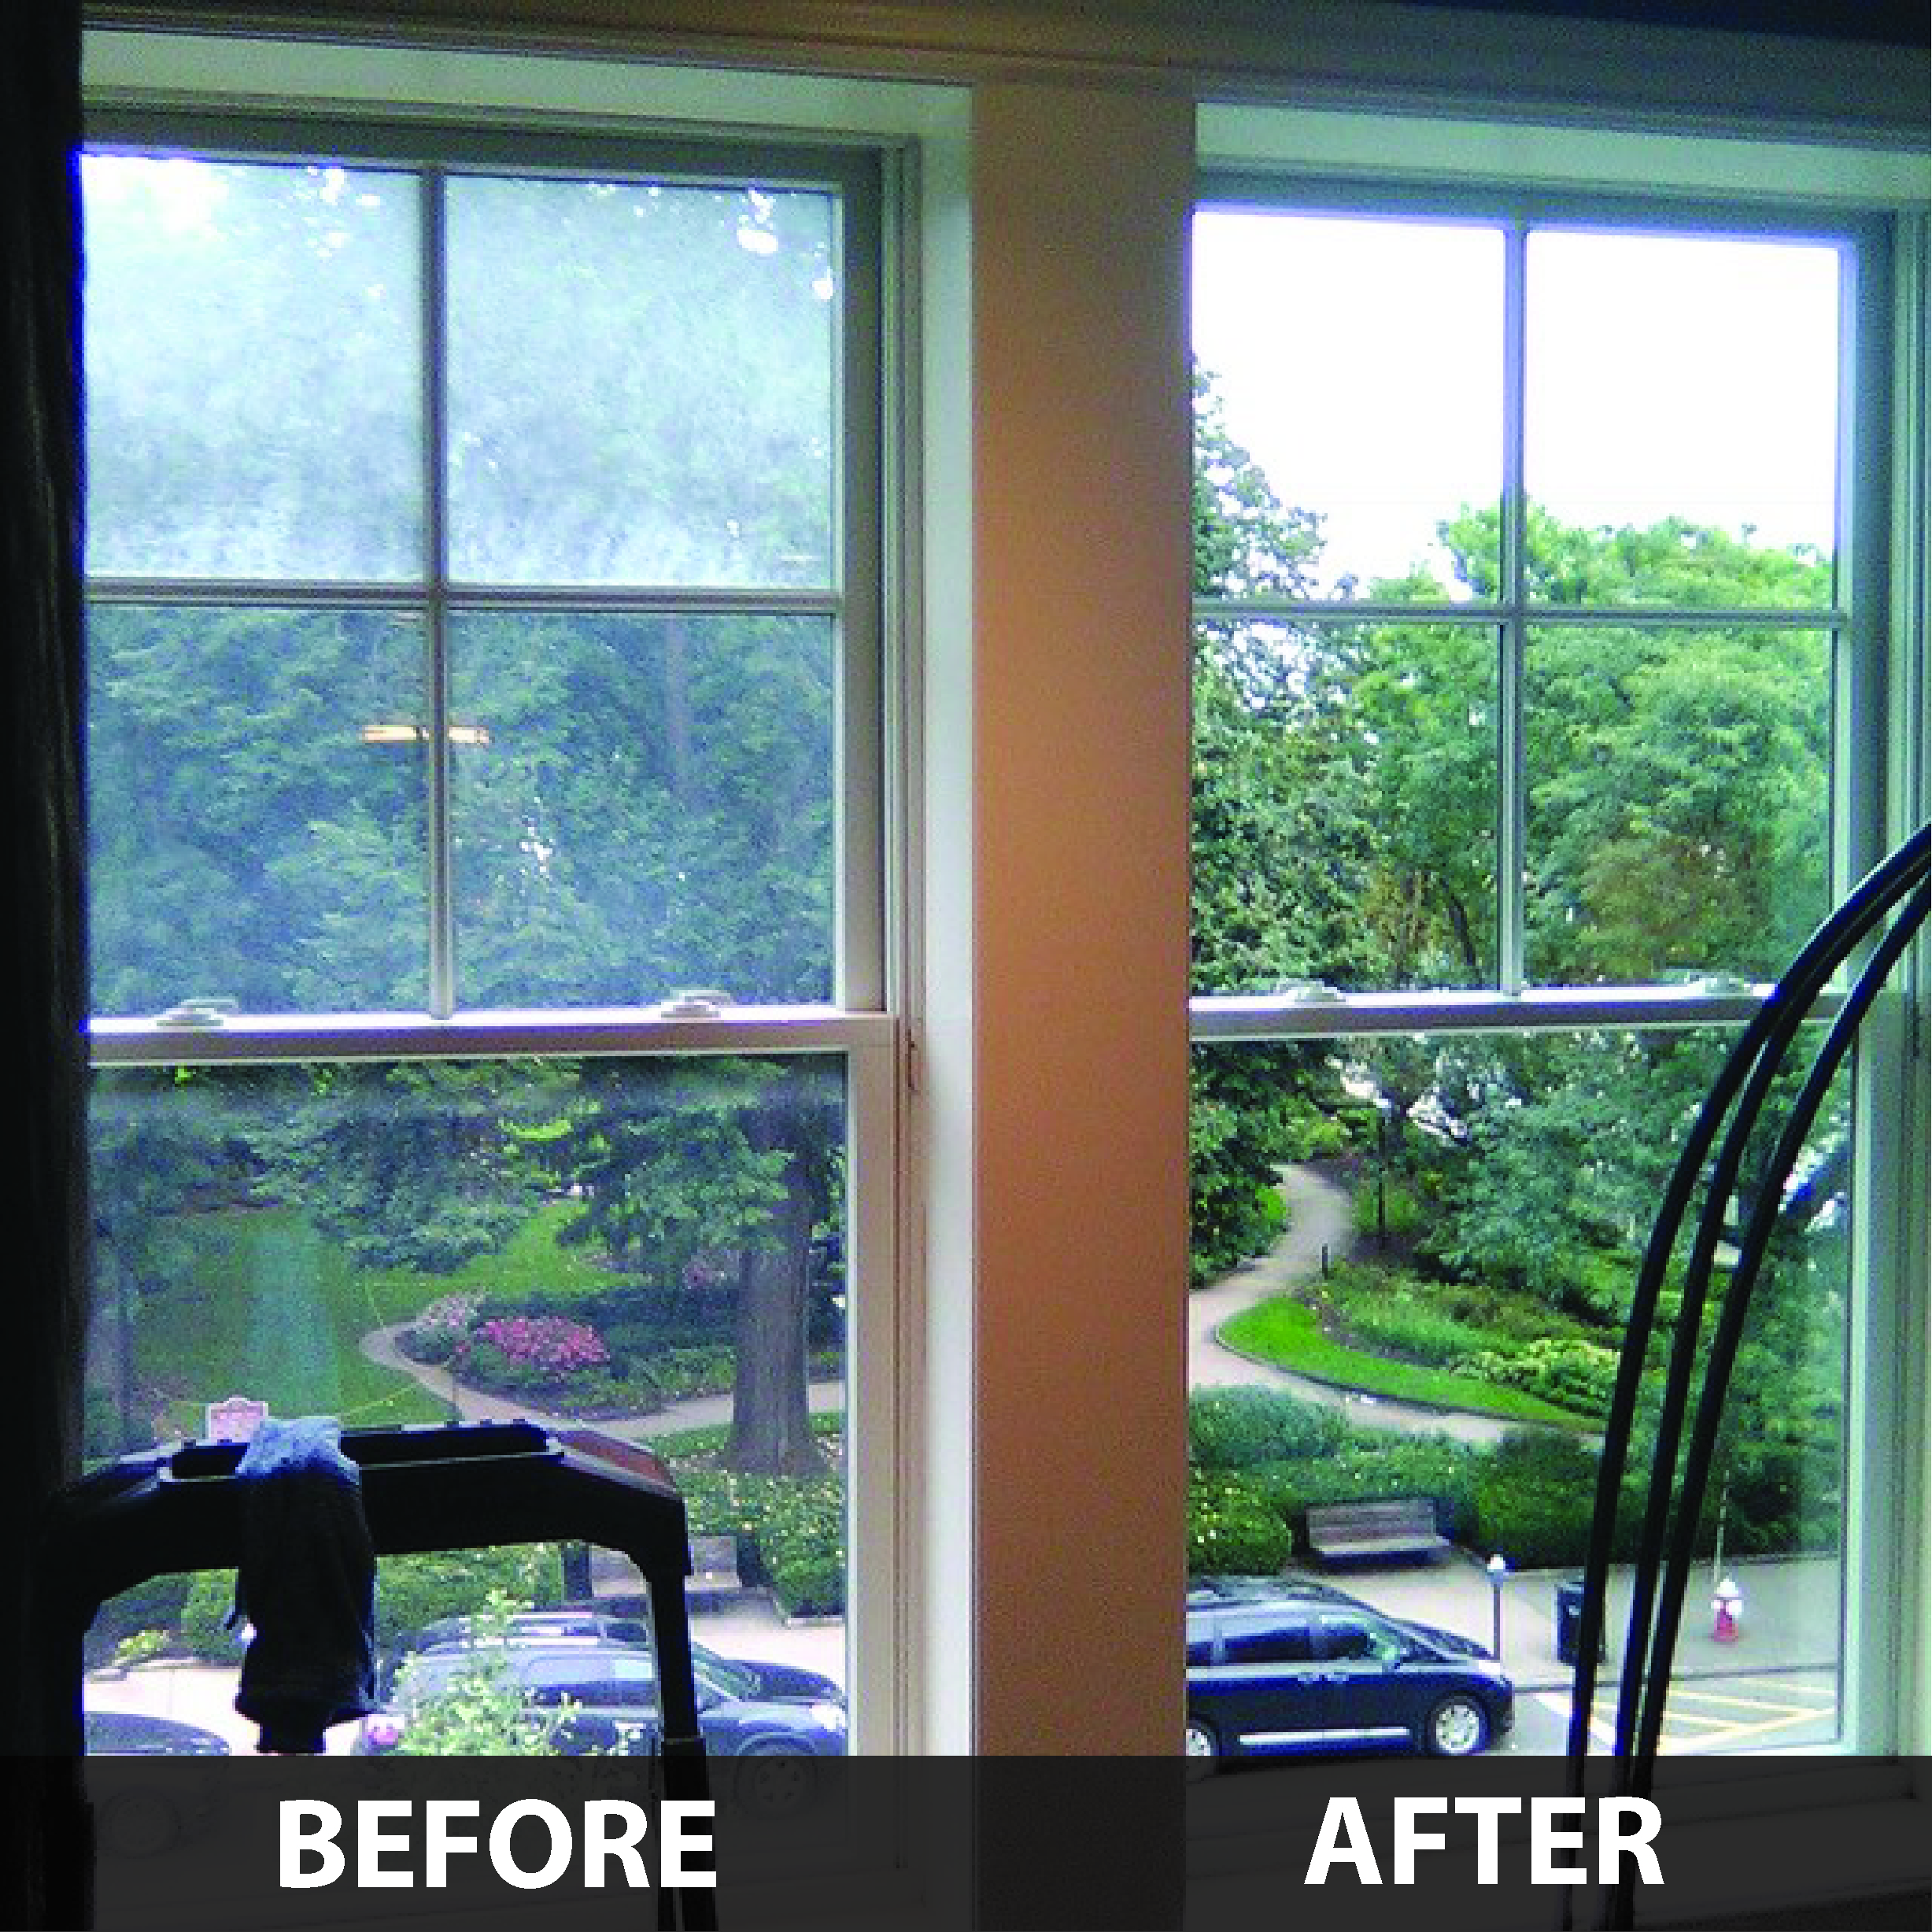 Before and After Photos Showing the Effect of Cleaning Windows